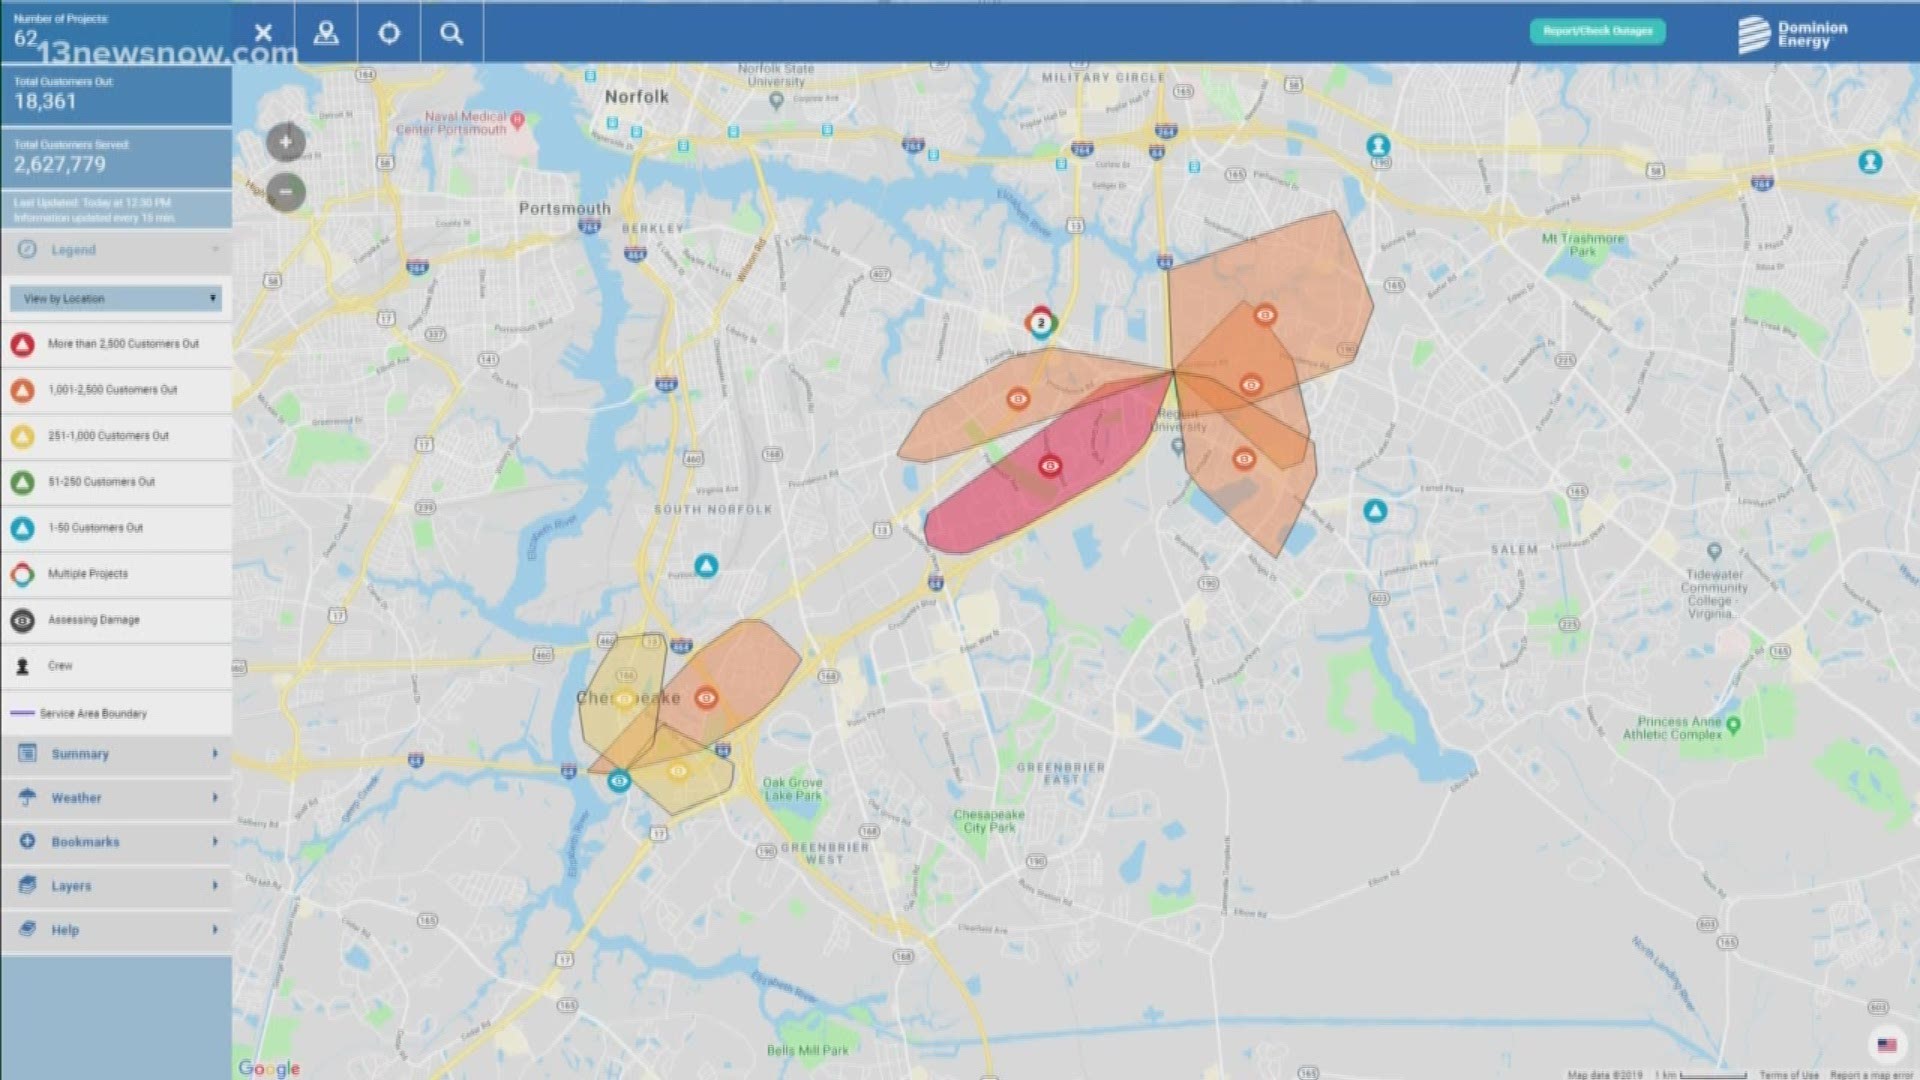 About 10,788 customers in Virginia Beach are without power, while 6,547 Chesapeake customers are affected.